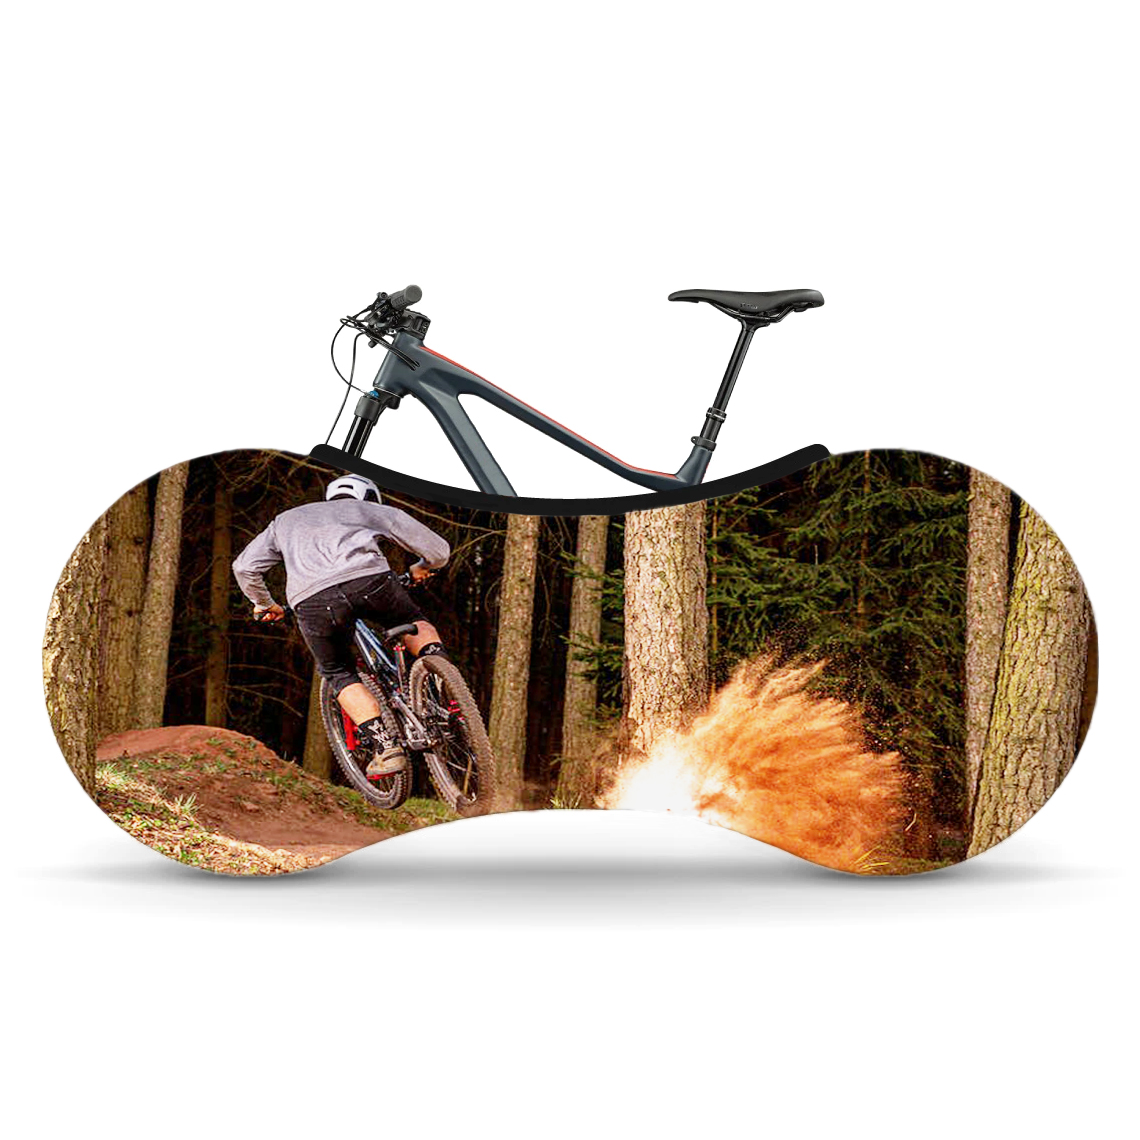 Indoor Bike Water Resistant Anti Dust Wheels Cover for Storage and Transportation - Mountain Trail